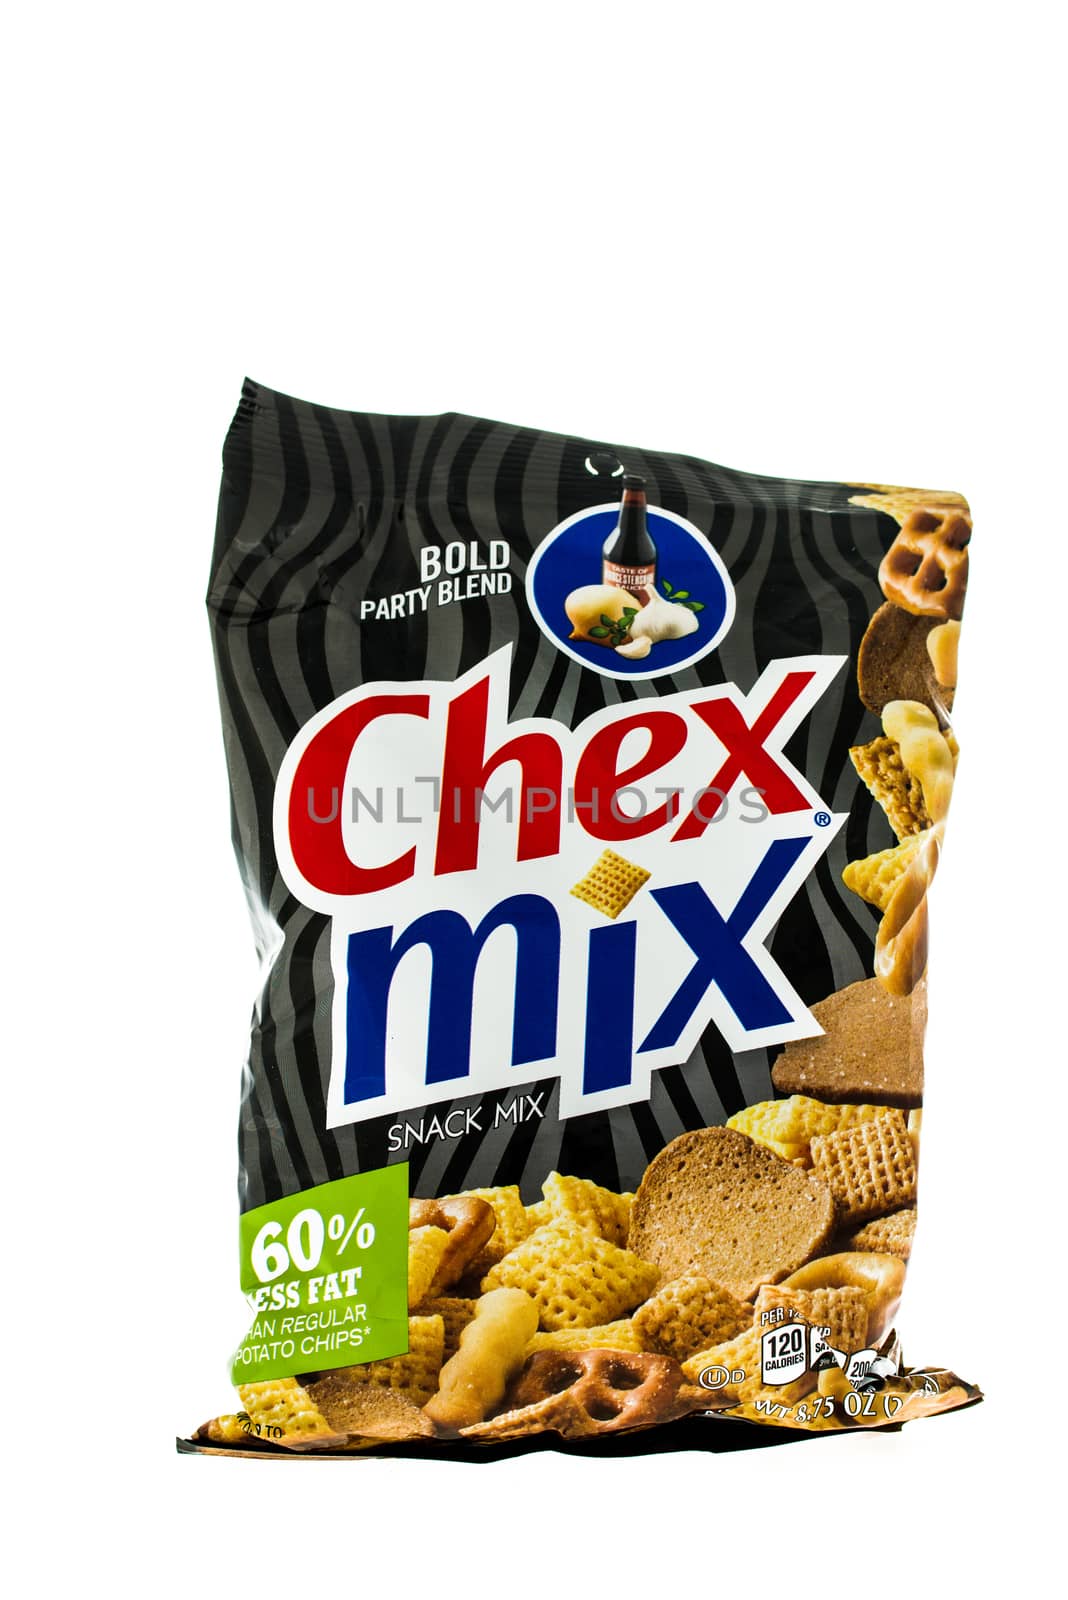 Winneconne, WI - 4 February 2015: Bag of Chex Mix Bold Party Blend snack mix. Created in 1985 as pre-packaged and is now owned by General Mills.